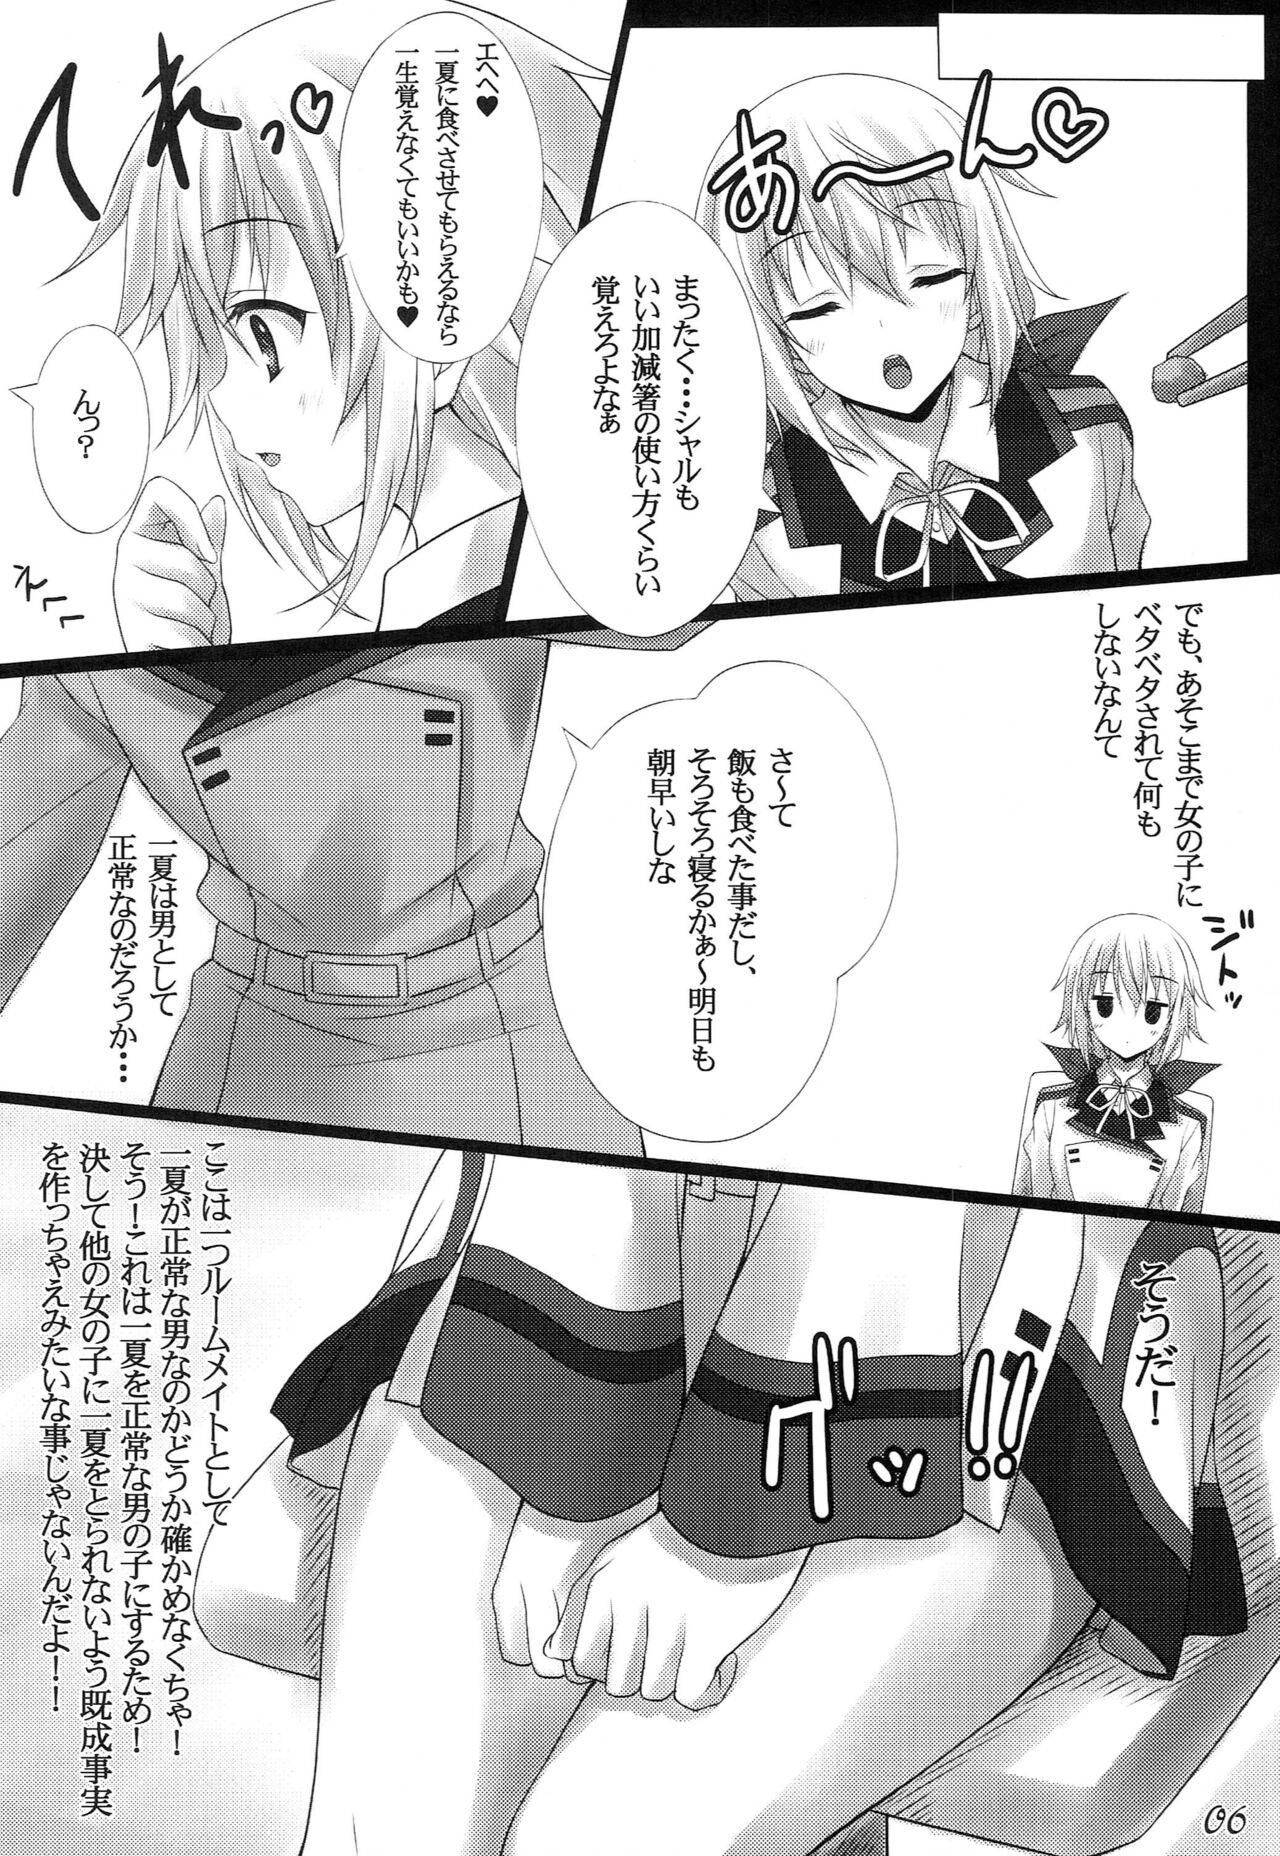 Interview Disguise - Infinite stratos Homosexual - Page 6